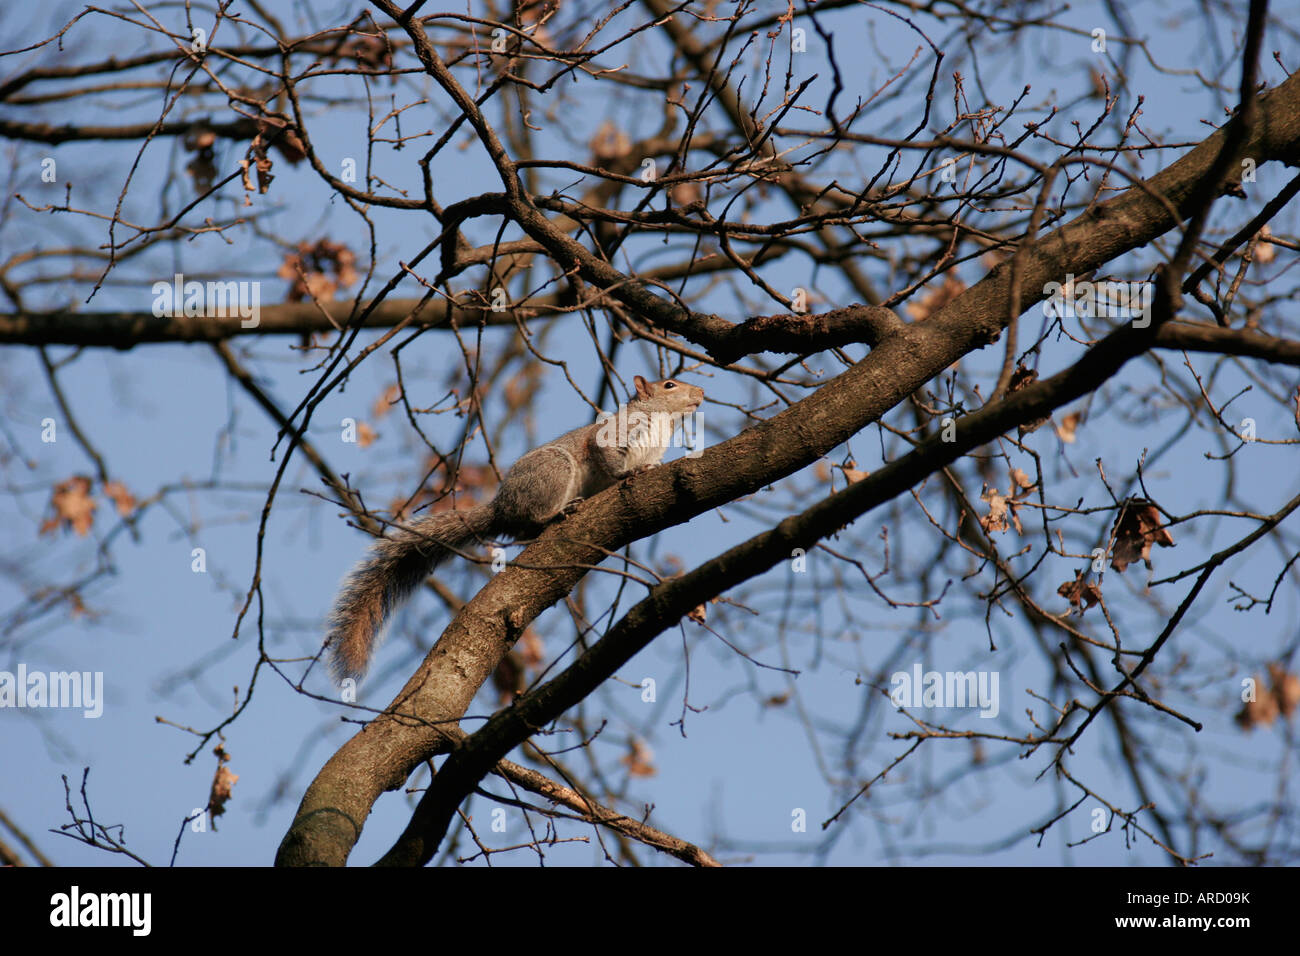 Squirrel running on a tree Stock Photo